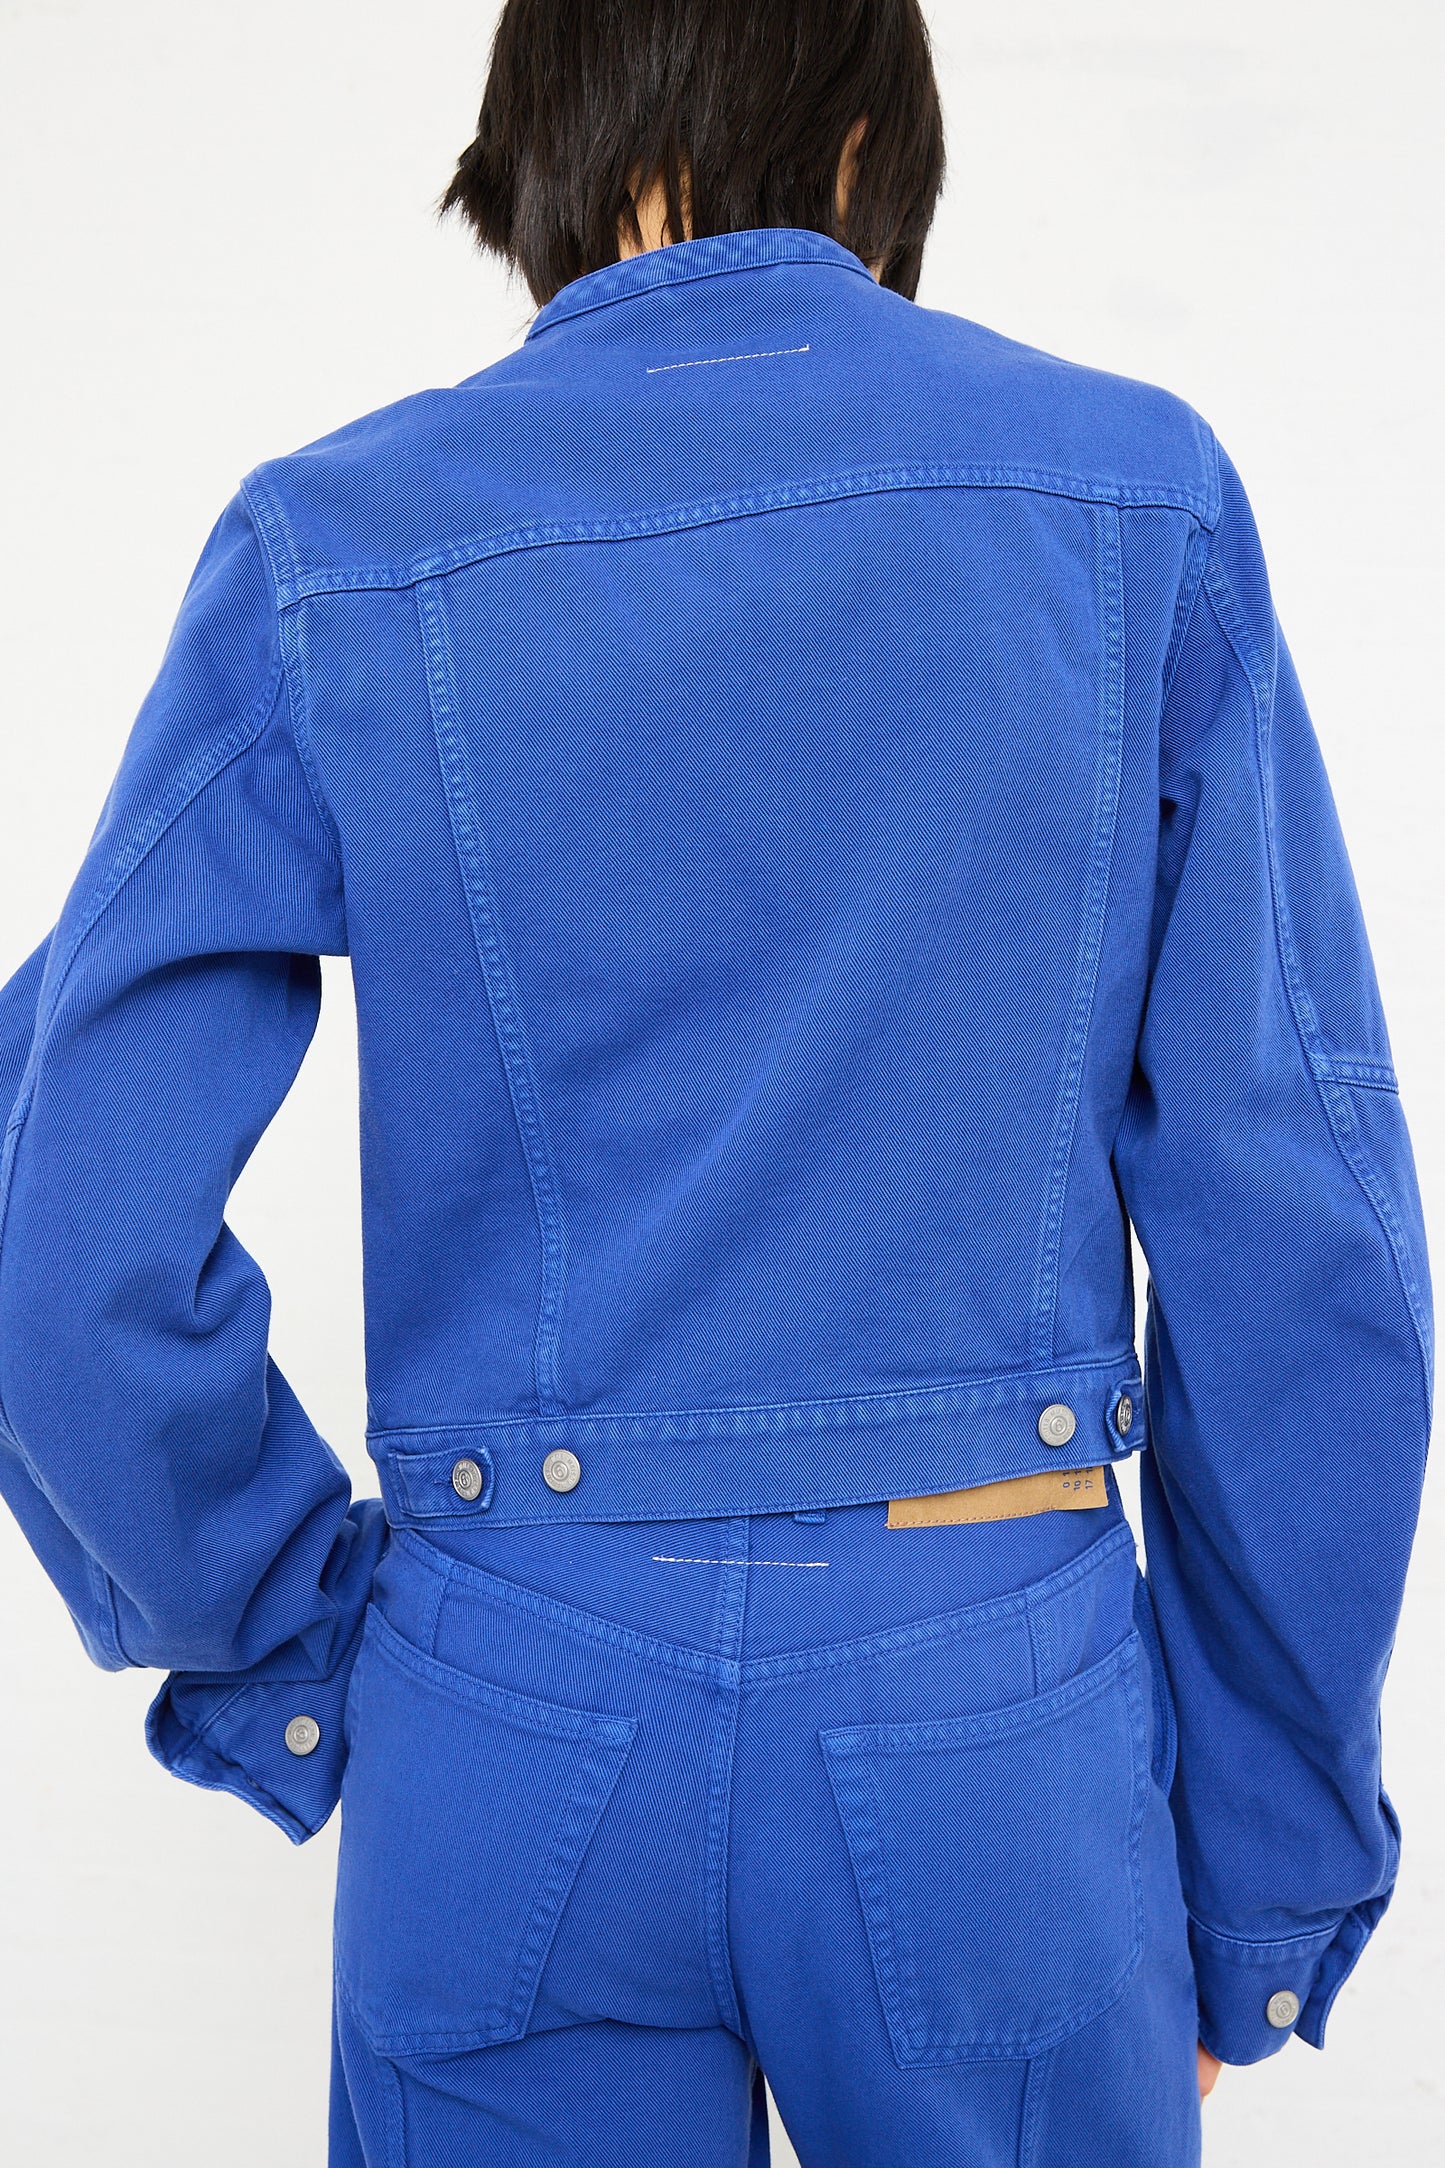 Rear view of a person wearing a bright blue MM6 Sports Jacket and matching jeans, standing against a white background.